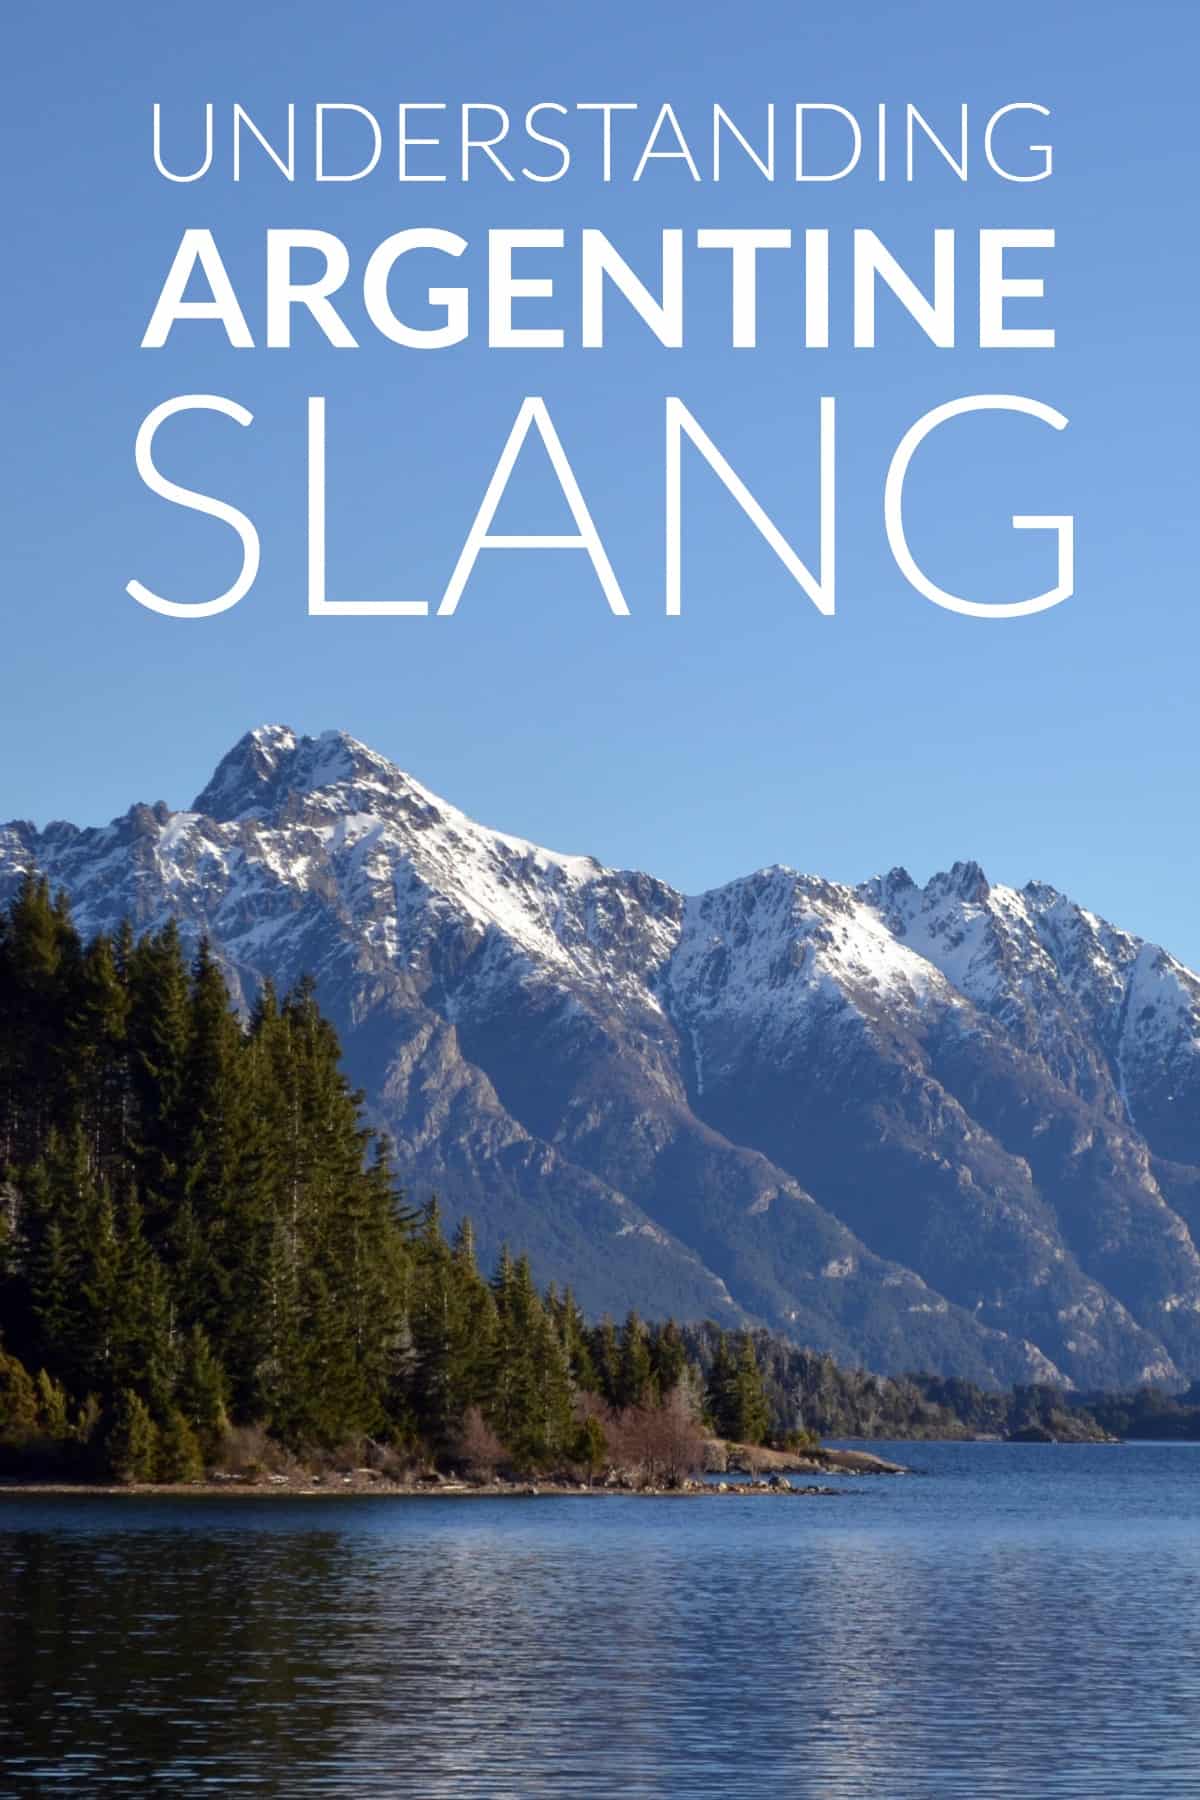 Lunfardo: Argentine slang can be the most confusing, hilarious and rewarding thing to learn. Here are the basics you need to know.